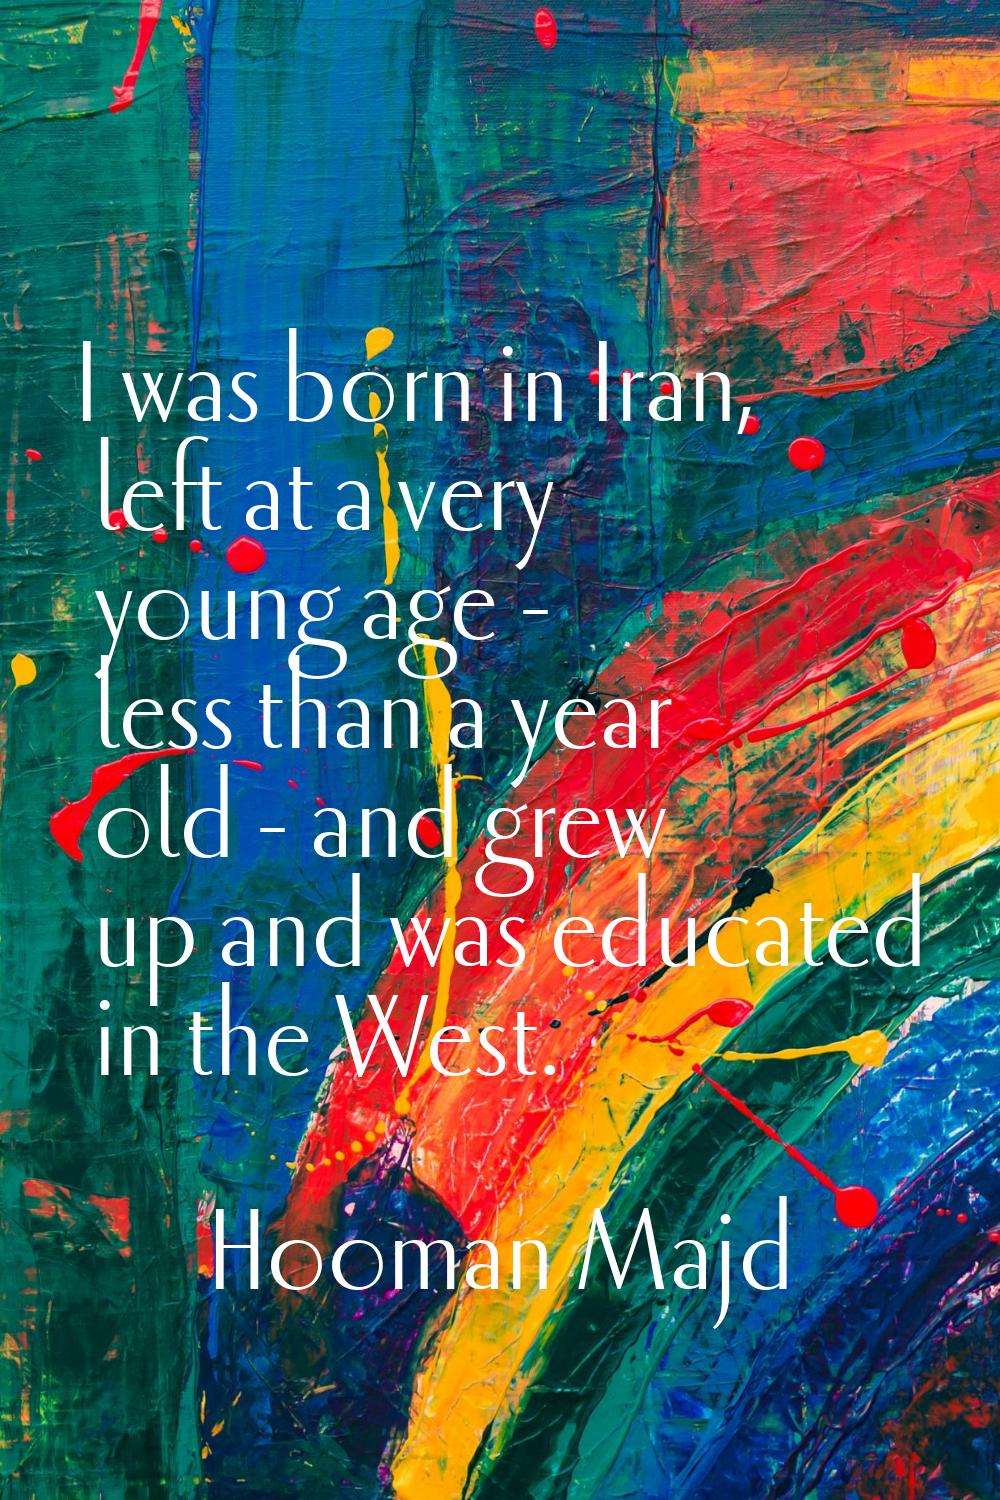 I was born in Iran, left at a very young age - less than a year old - and grew up and was educated 